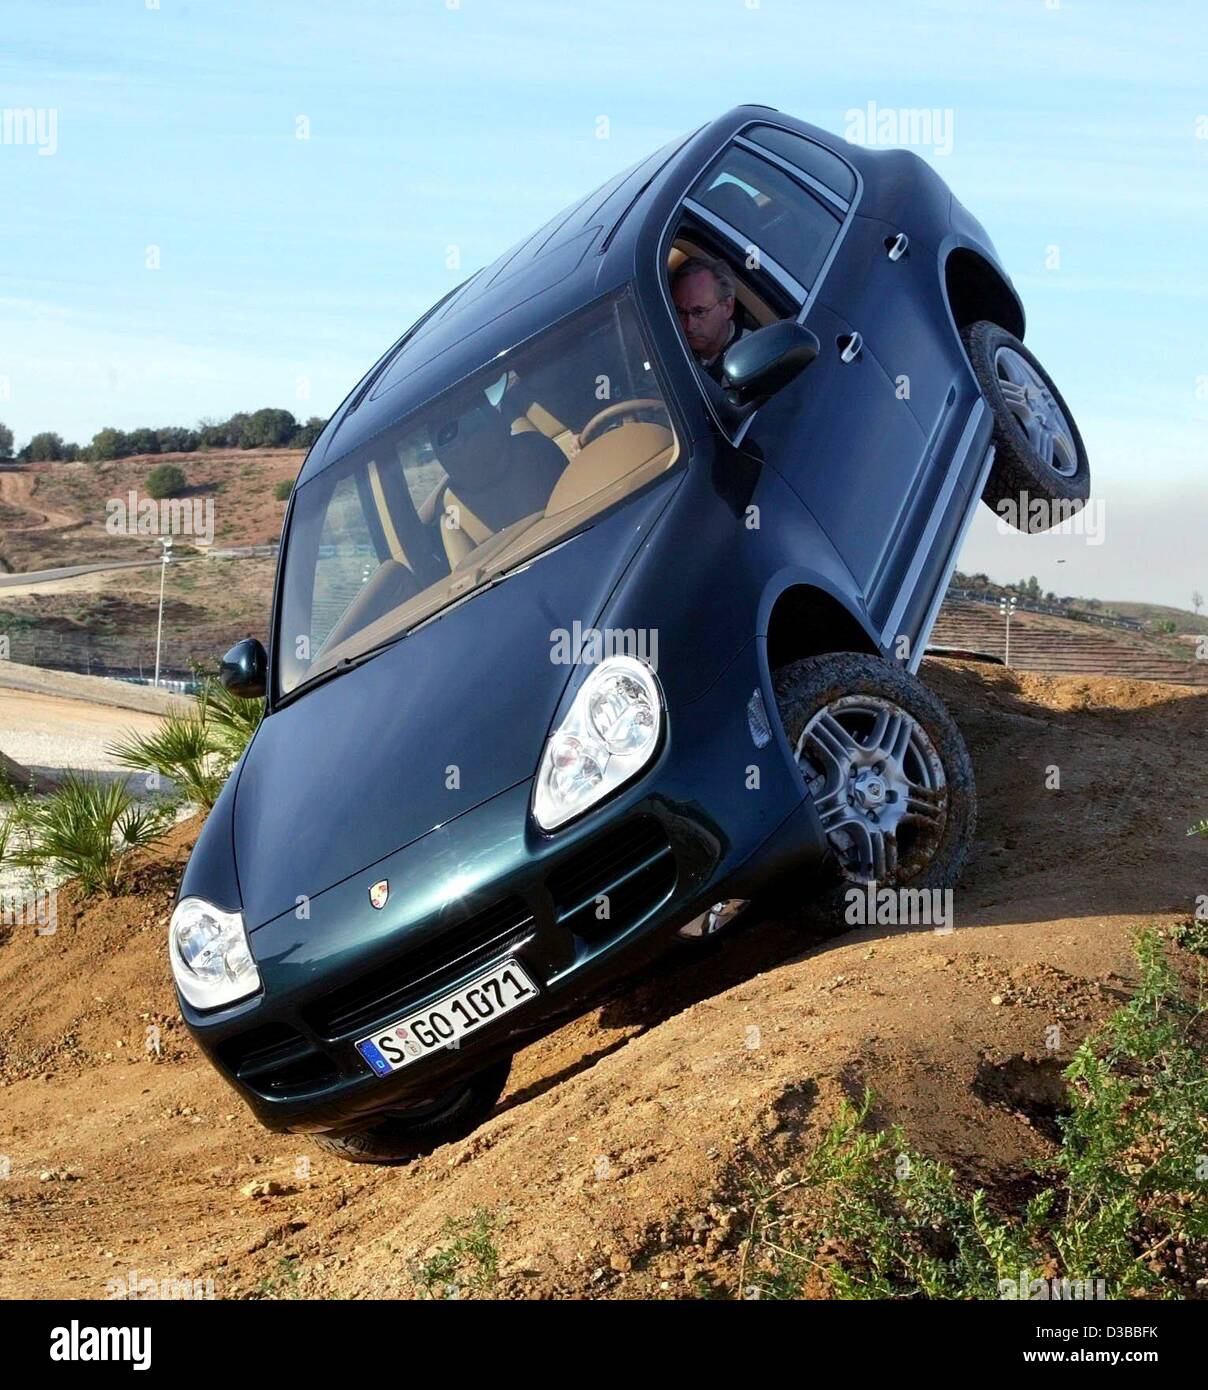 dpa) - Testdrivers show the abilities of the new Porsche Cayenne cross  country vehicle on an offroad track near Jerez de la Frontera, Spain, 5  November 2002. The new Porsche model will